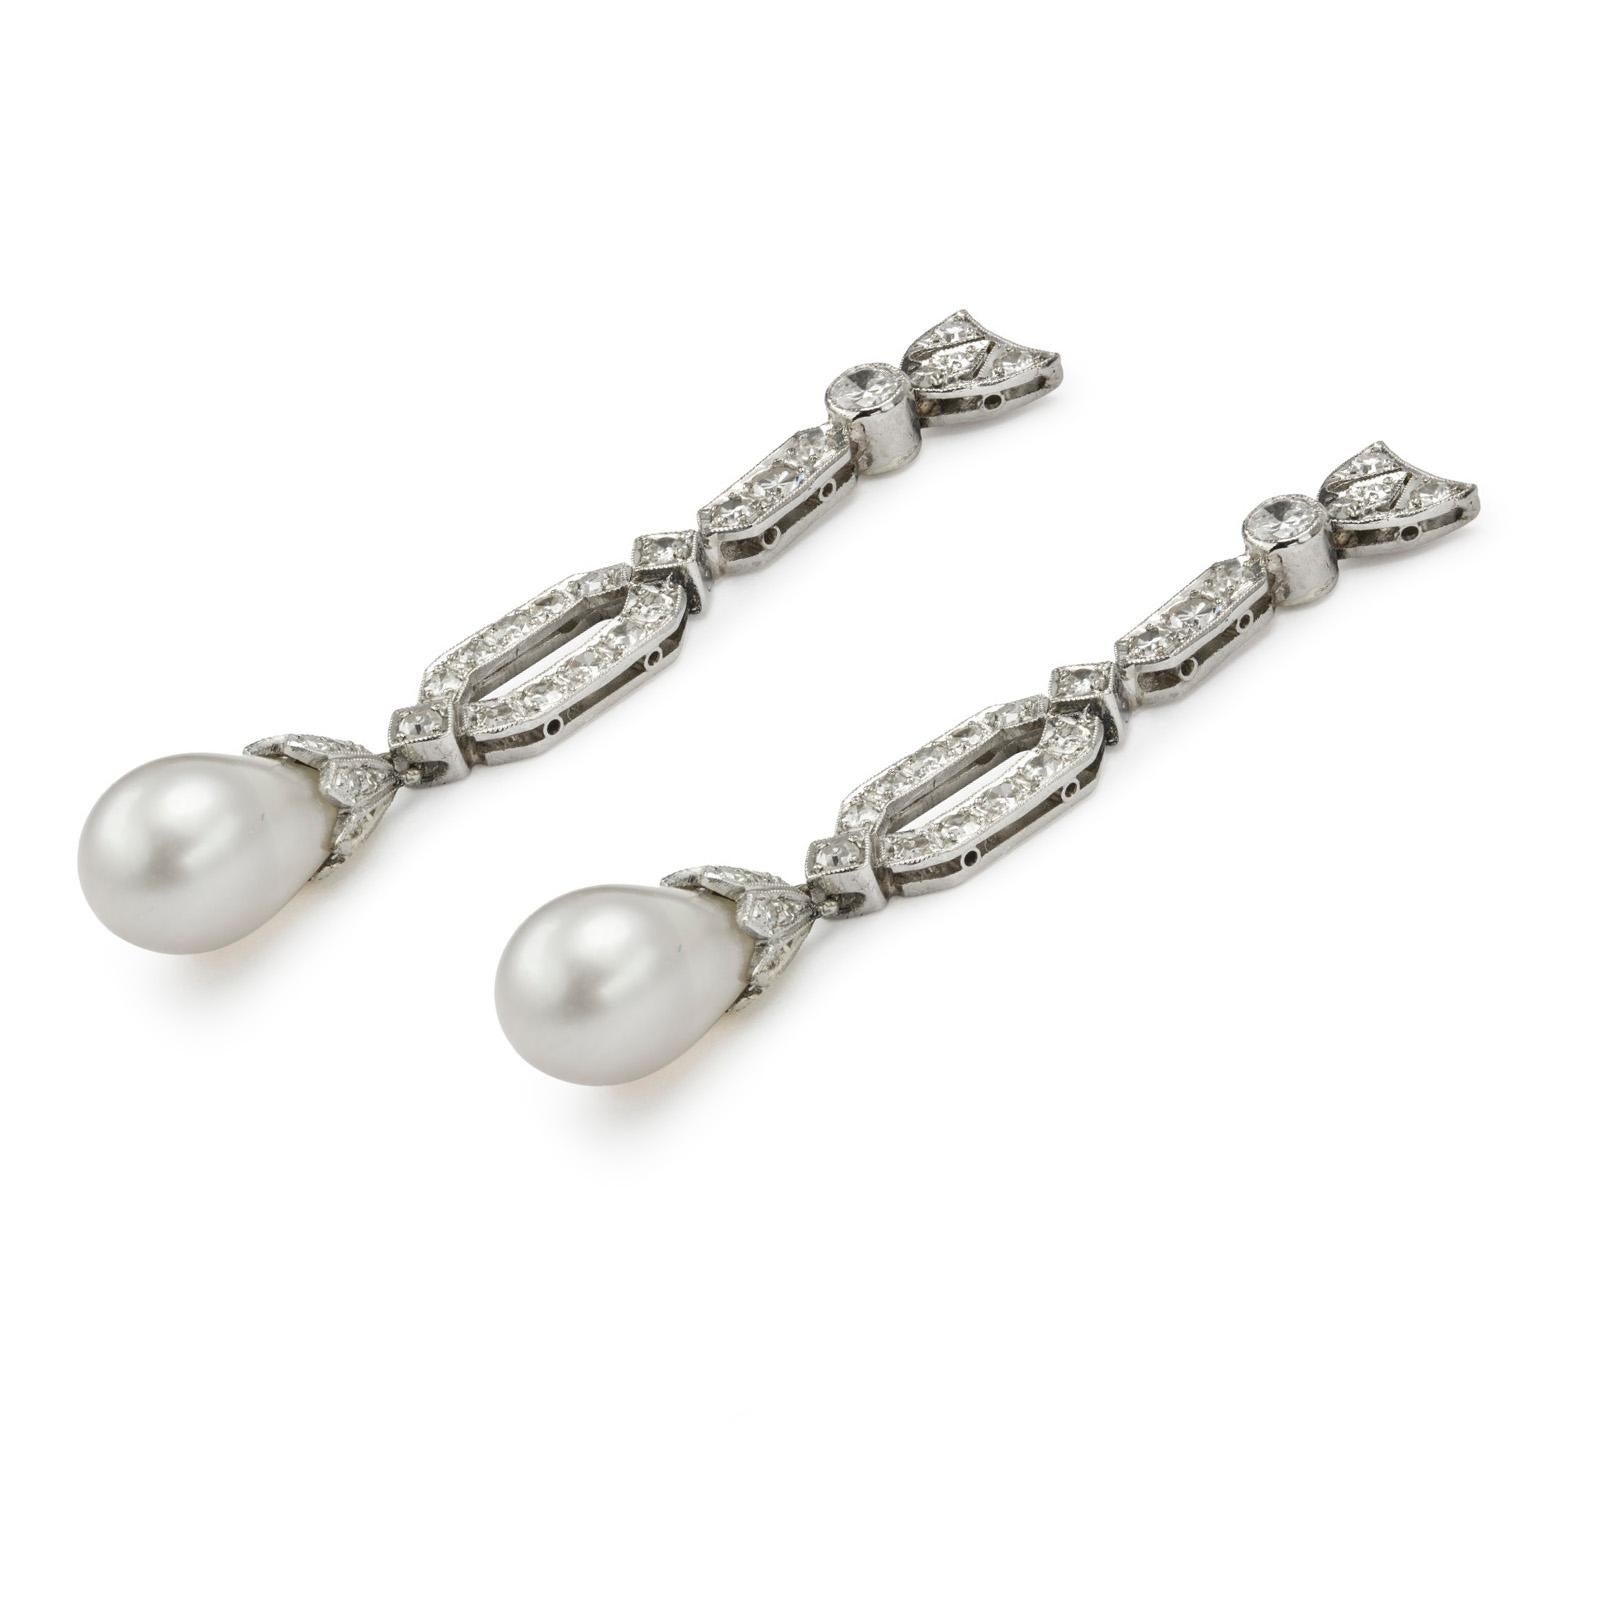 A pair of natural saltwater pearl and diamond drop earrings, each pearl measure approximately 7.3 x 11.5 mm and 7.2 x 11.0 mm, each with eight-cut diamond encrusted white gold caps, suspended by a hexagonal openwork diamond-encrusted plaque of a